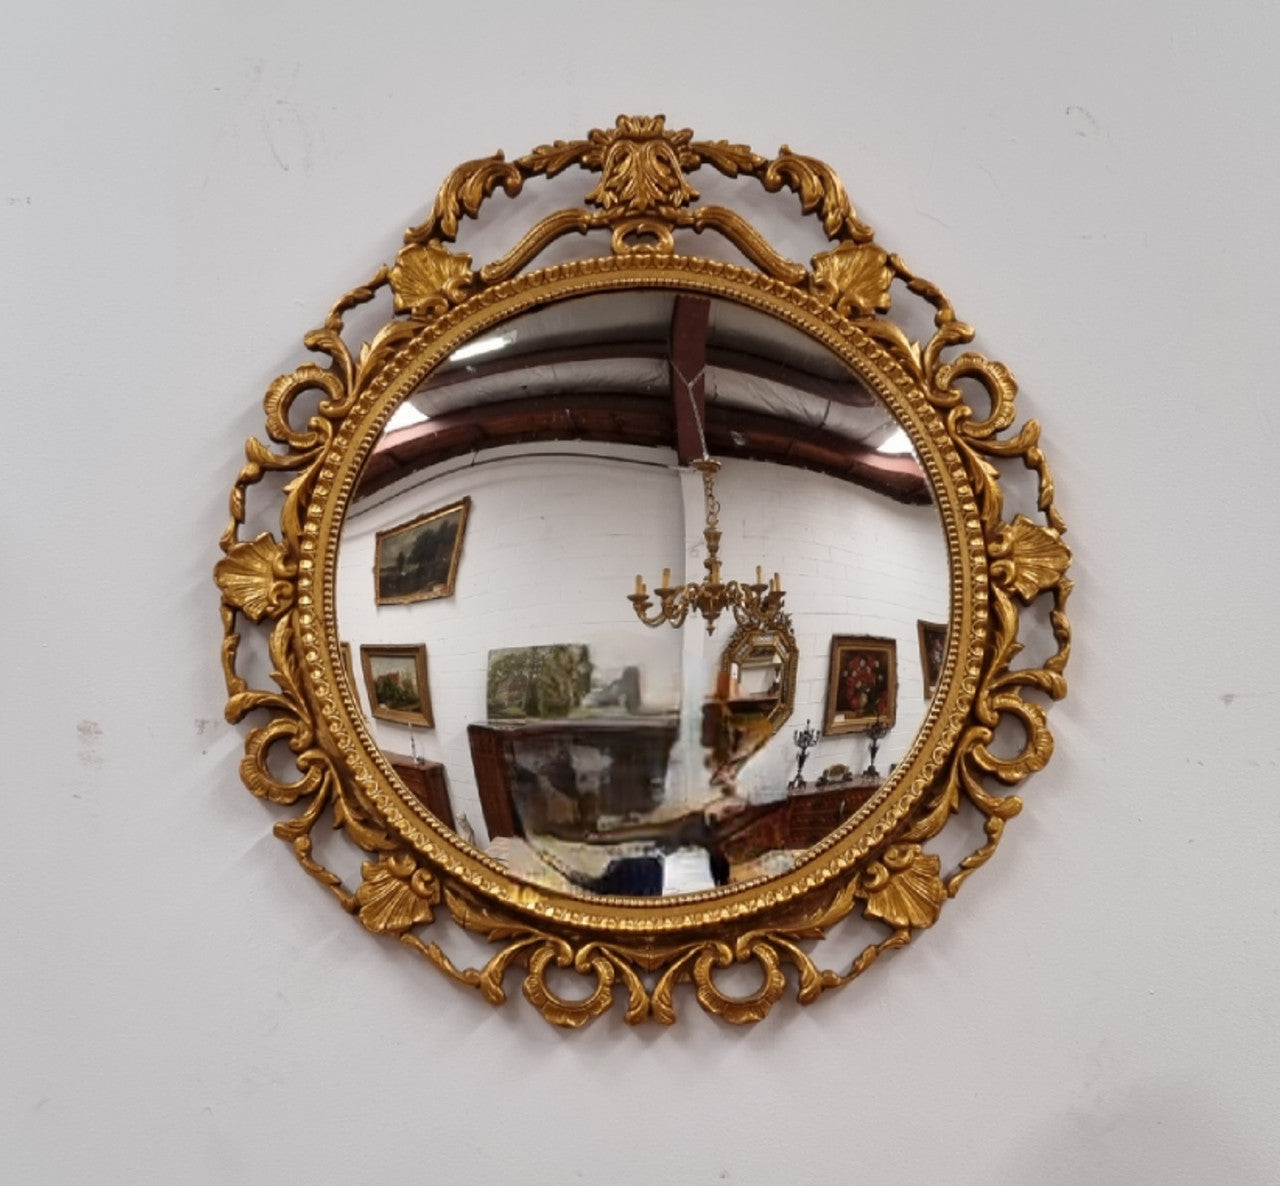 Vintage large round ornate convex mirror. Lovely gilt decoration around and is in good original condition.